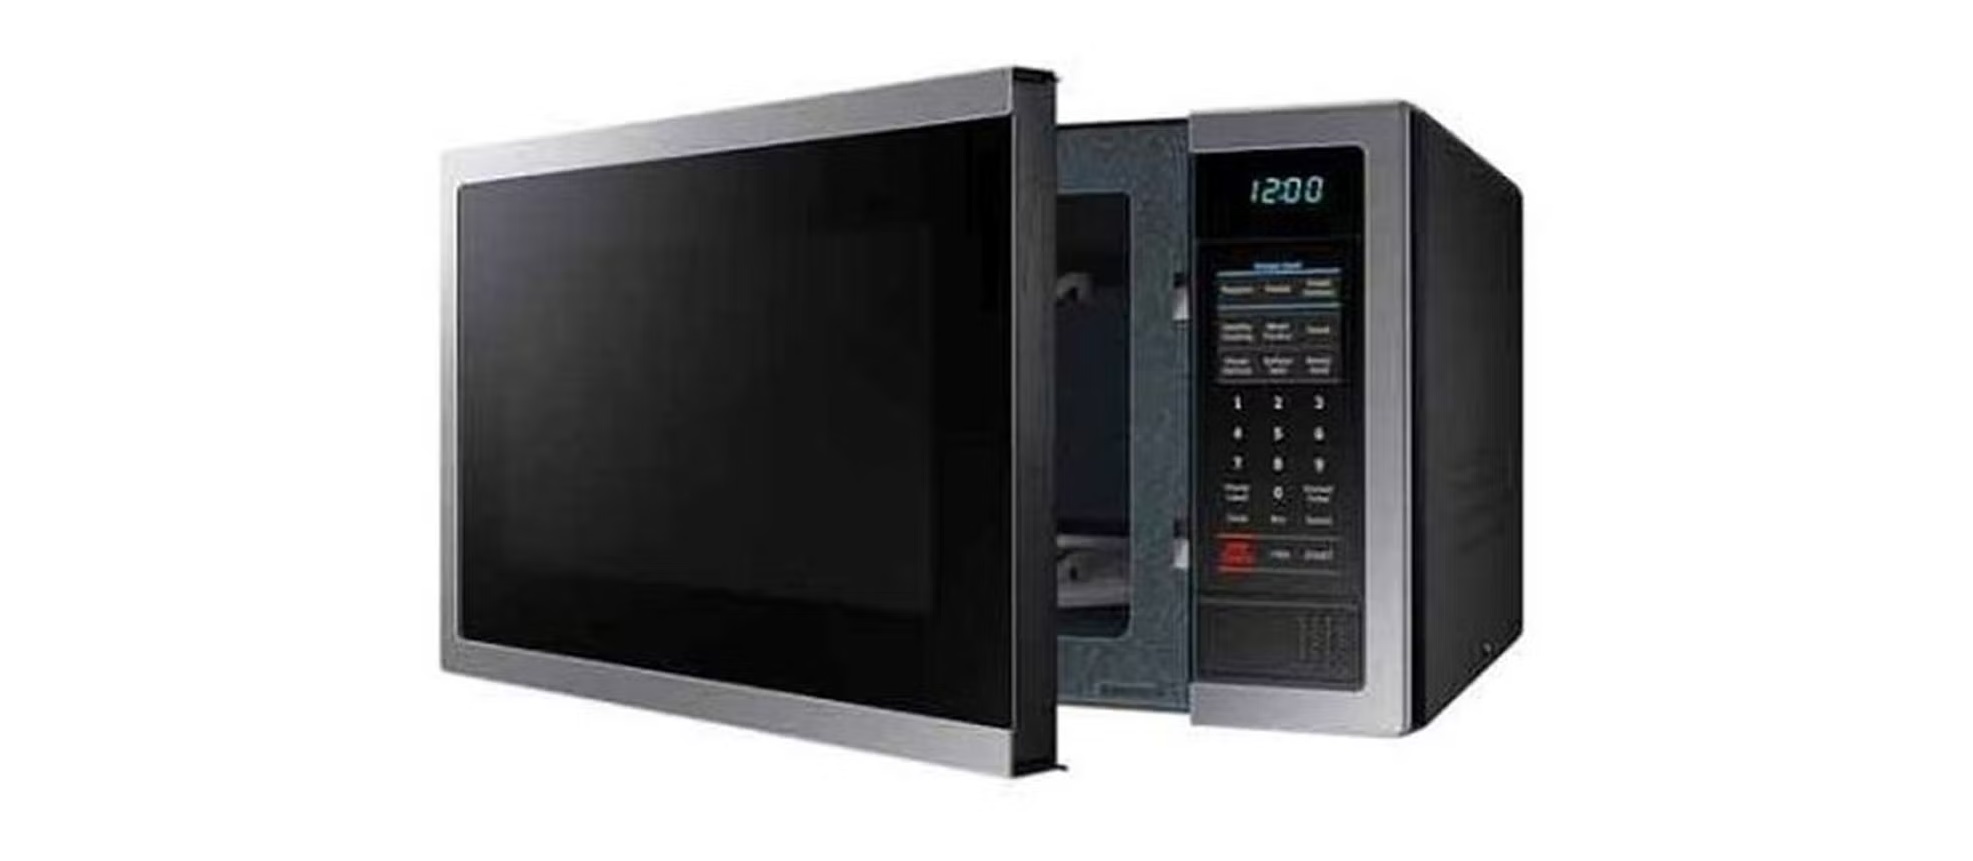 Samsung Microwave And Oven Control, Silver/Black - ME6194ST